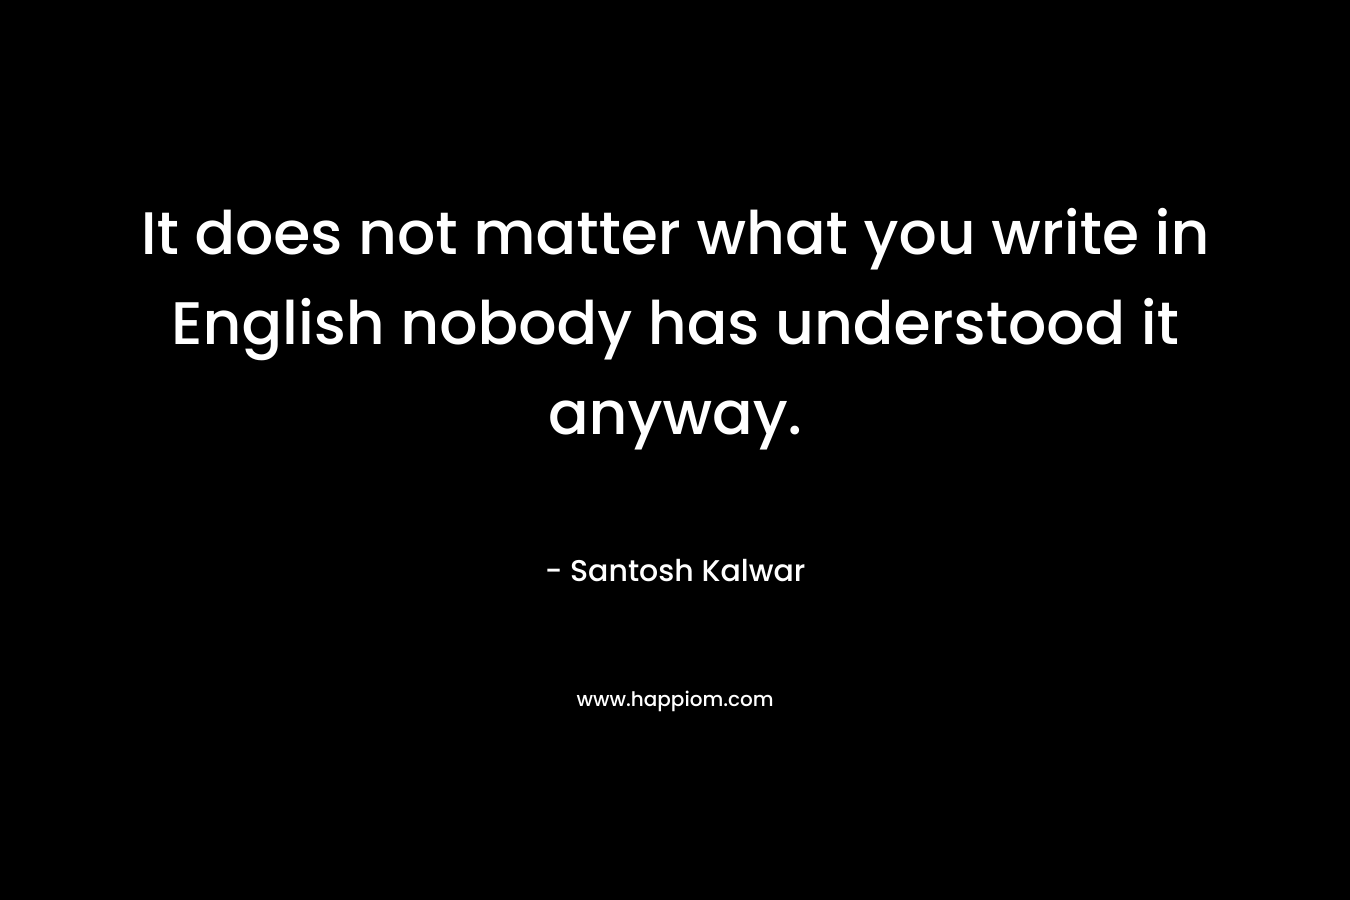 It does not matter what you write in English nobody has understood it anyway. – Santosh Kalwar